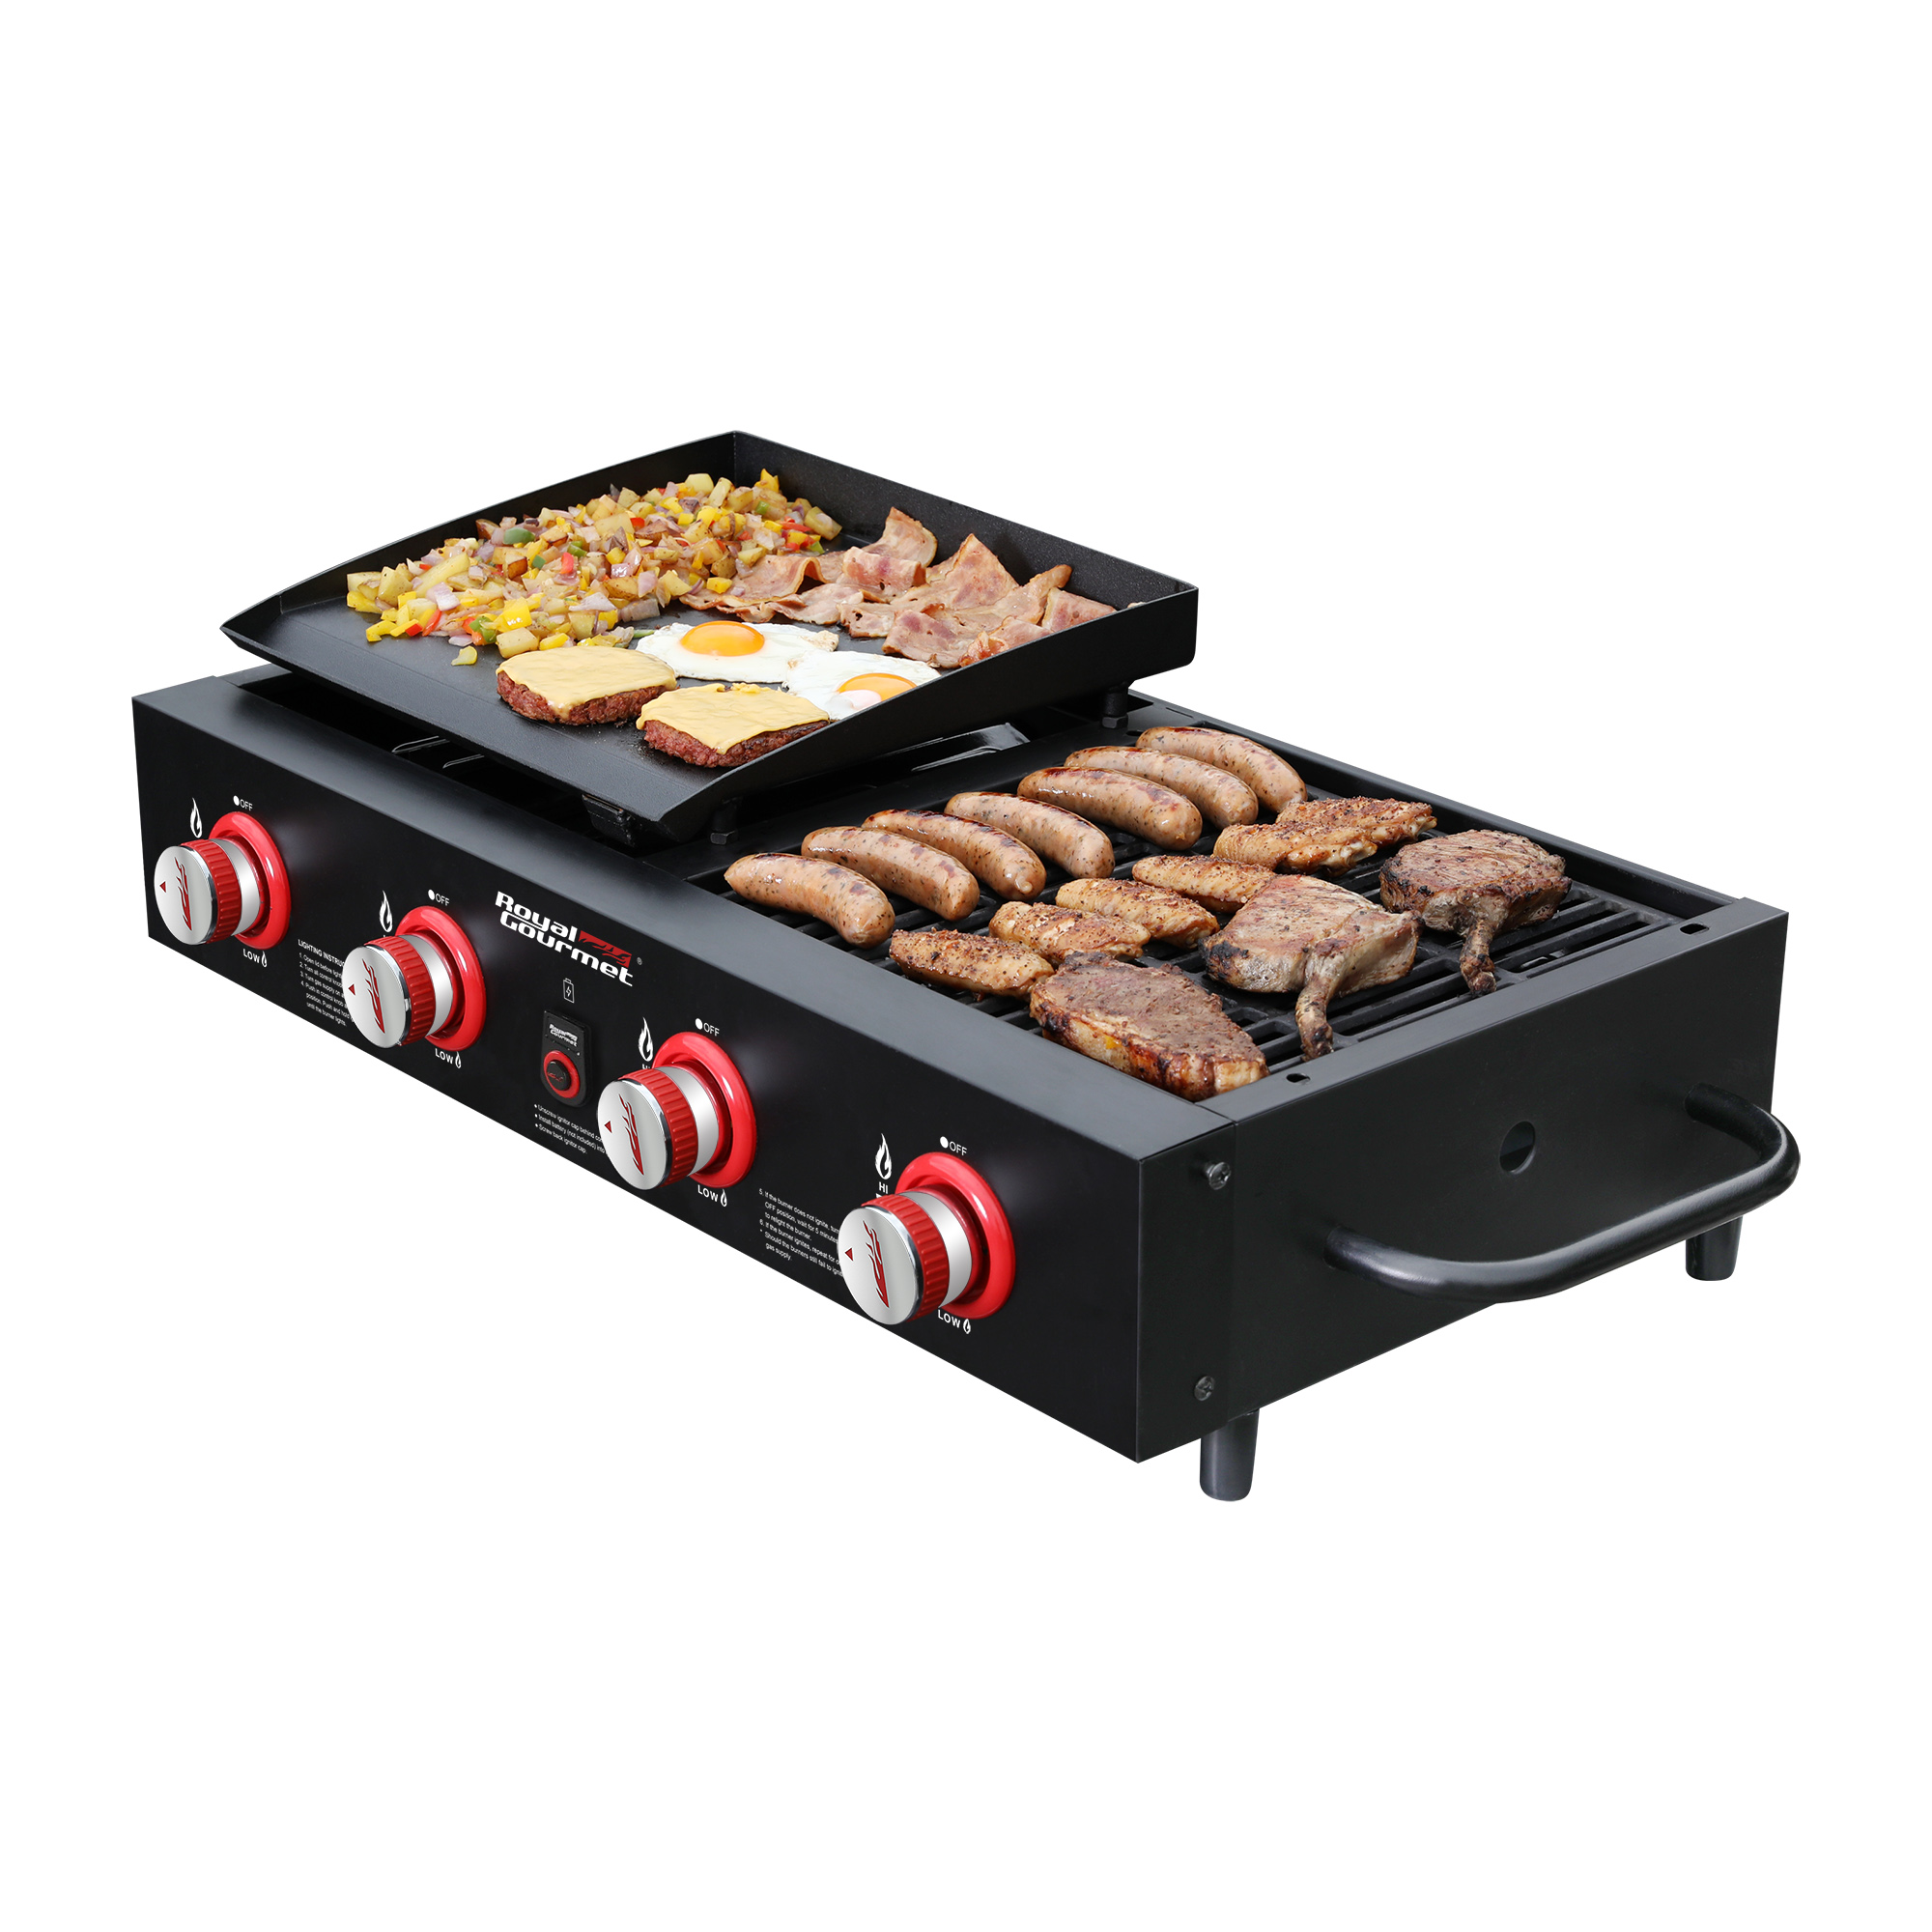 Royal Gourmet 4-Burner GD4002T Portable Gas Grill and Griddle Combo, 40000 BTU - image 3 of 19